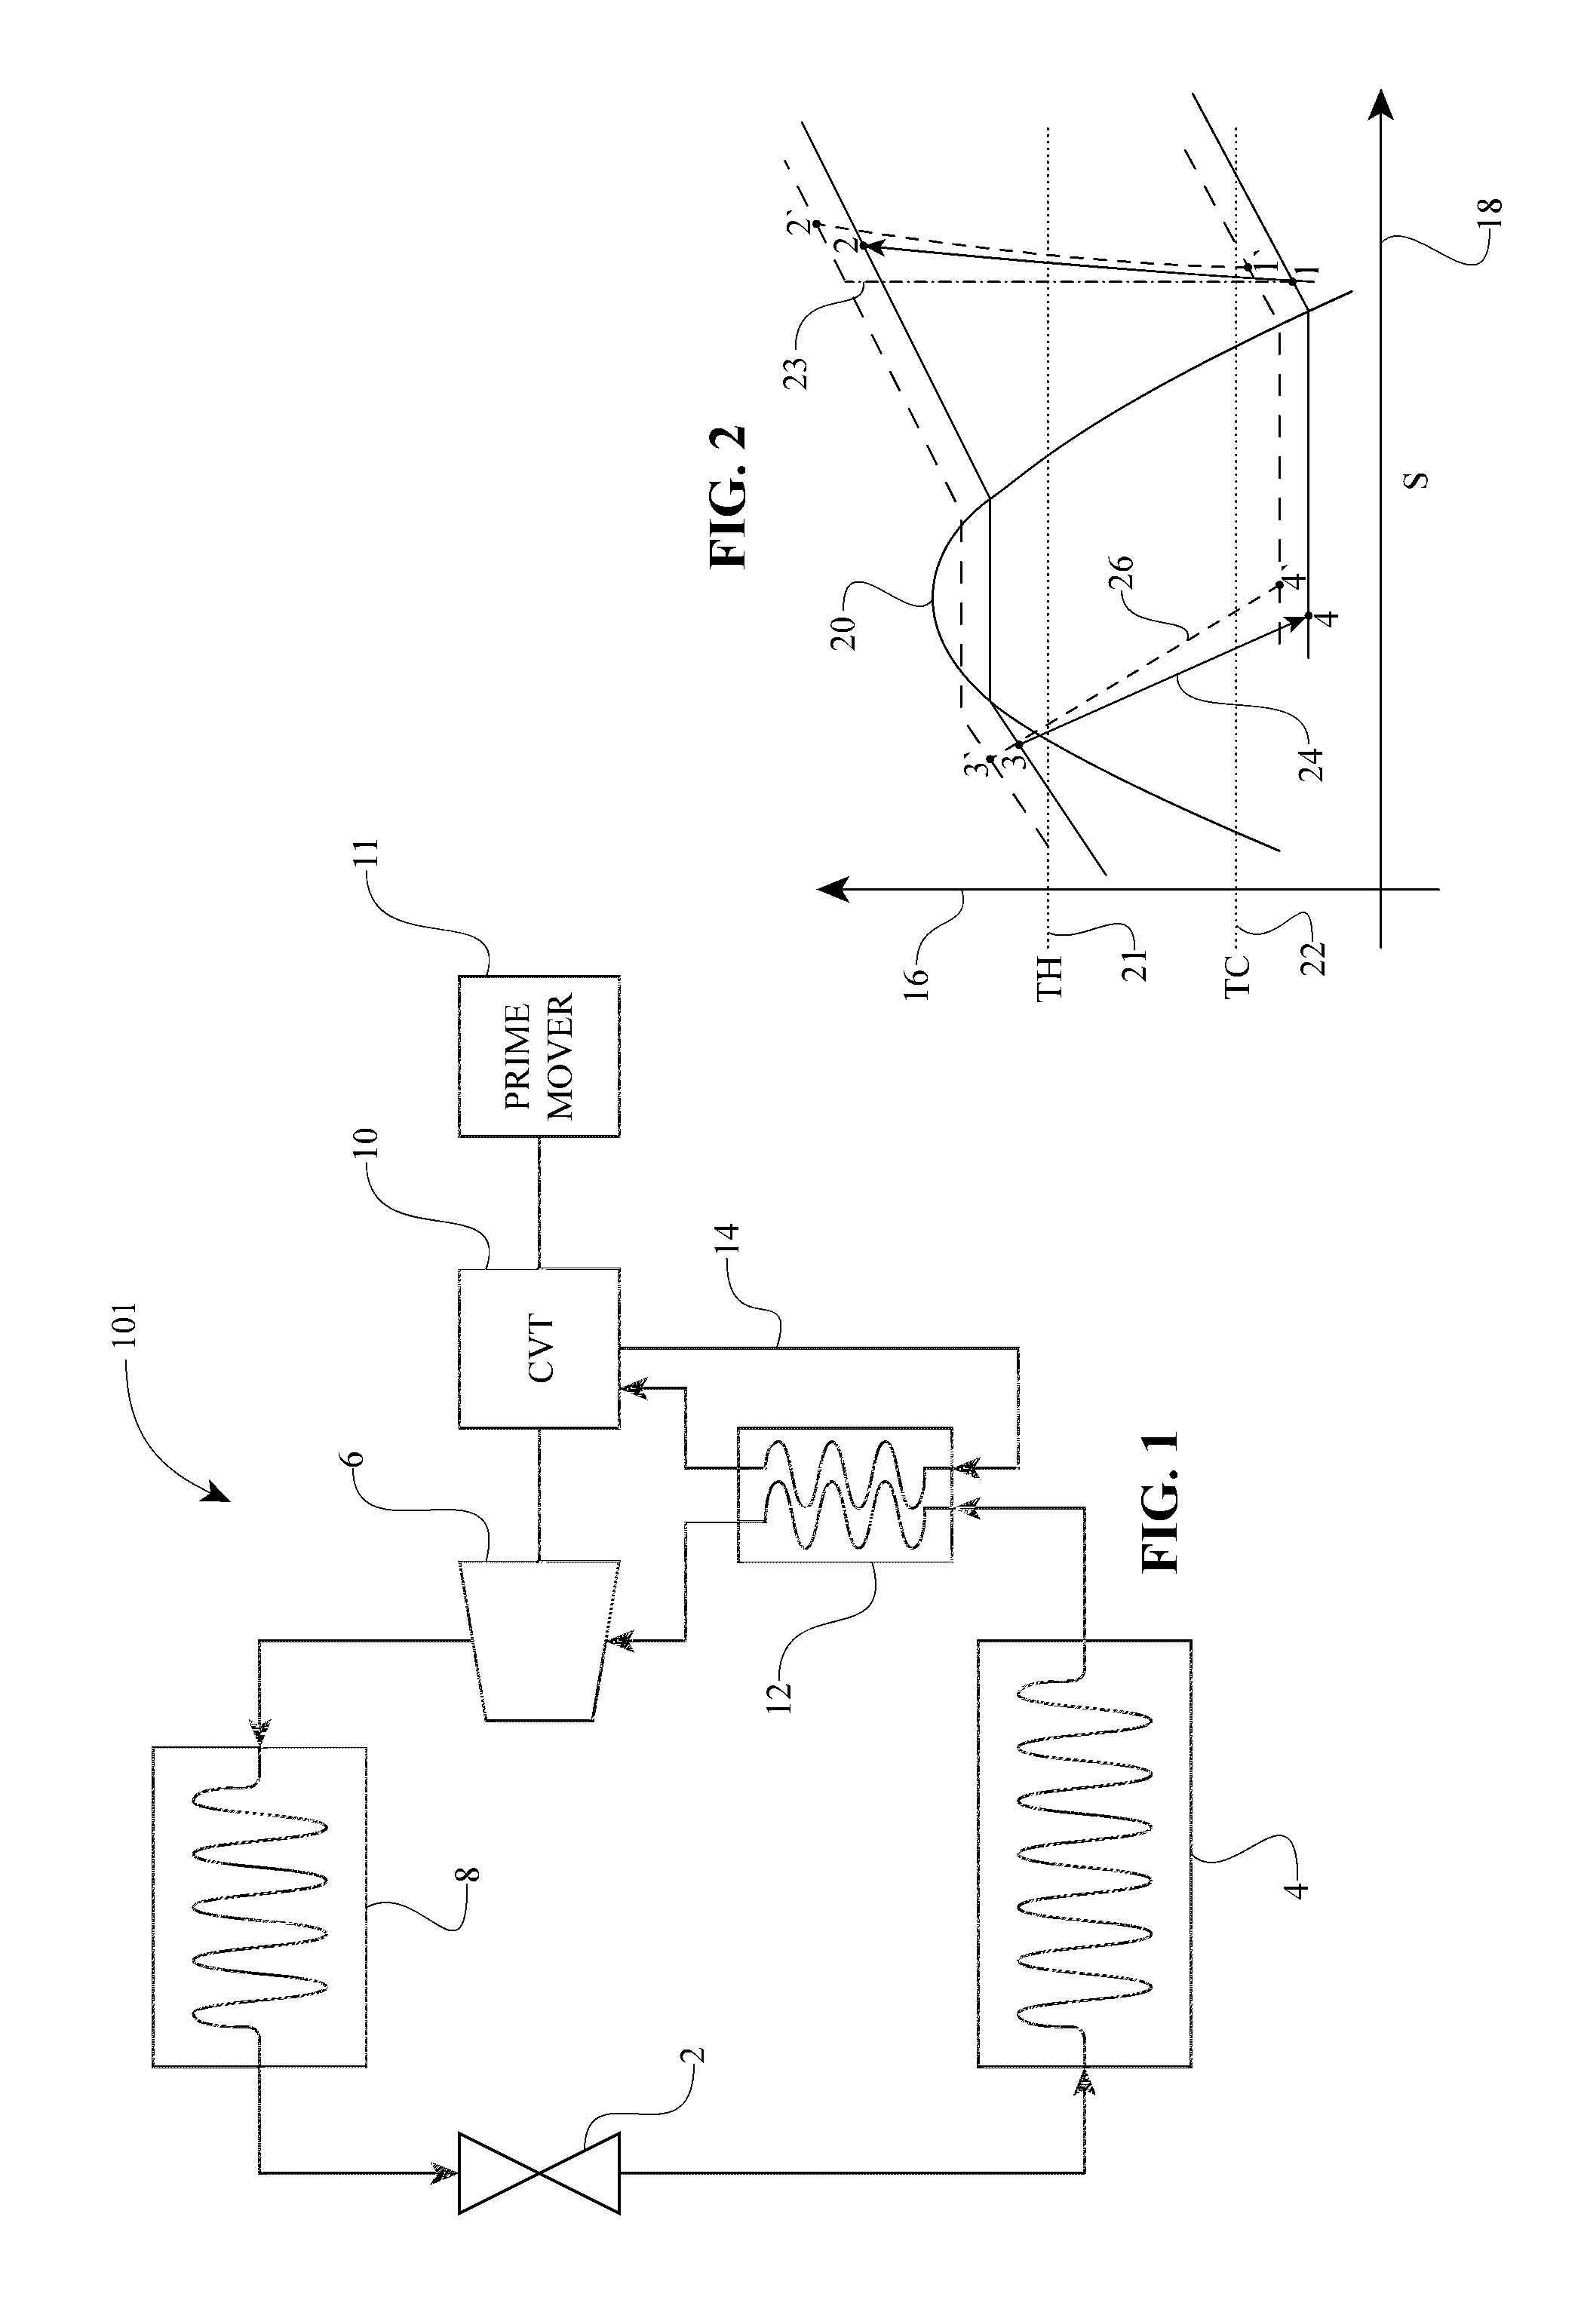 Refrigeration system having a continuously variable transmission